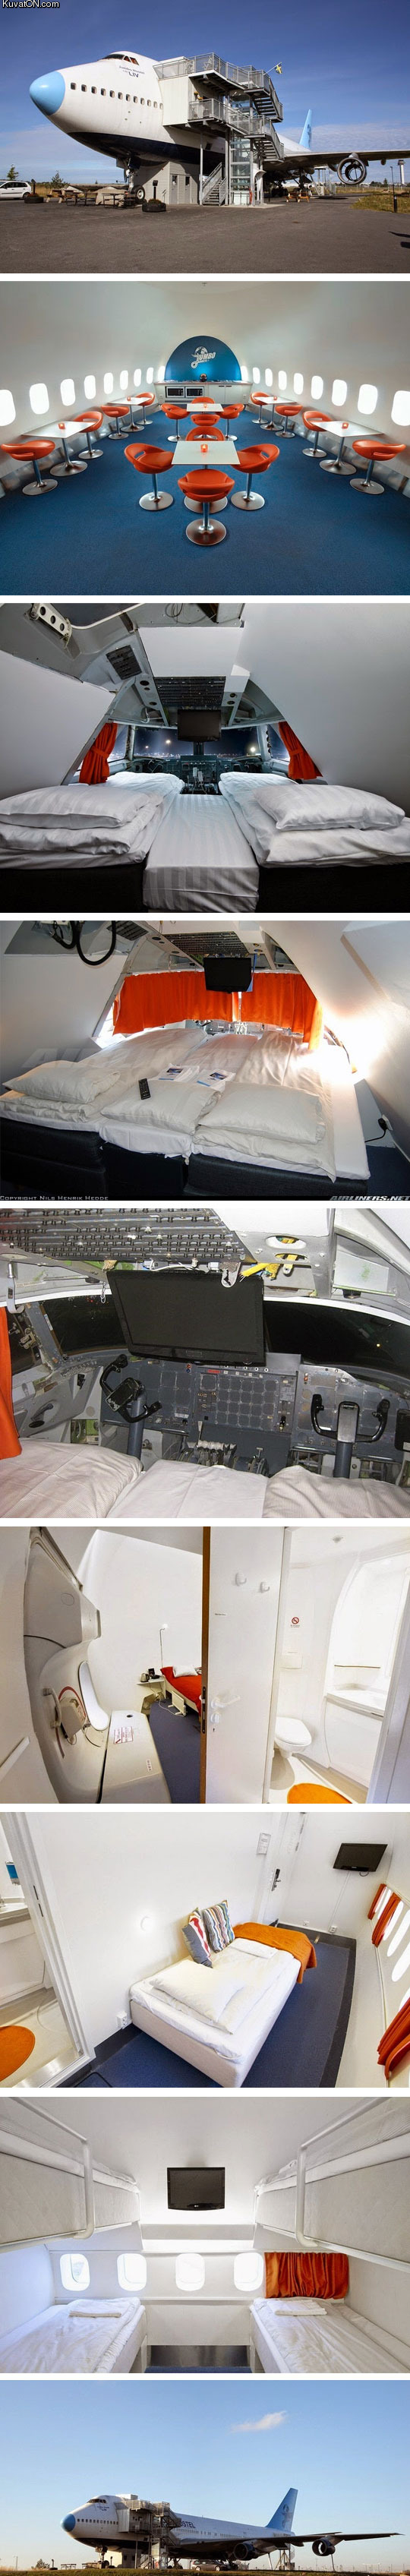 an_airplane_converted_into_a_hotel.jpg